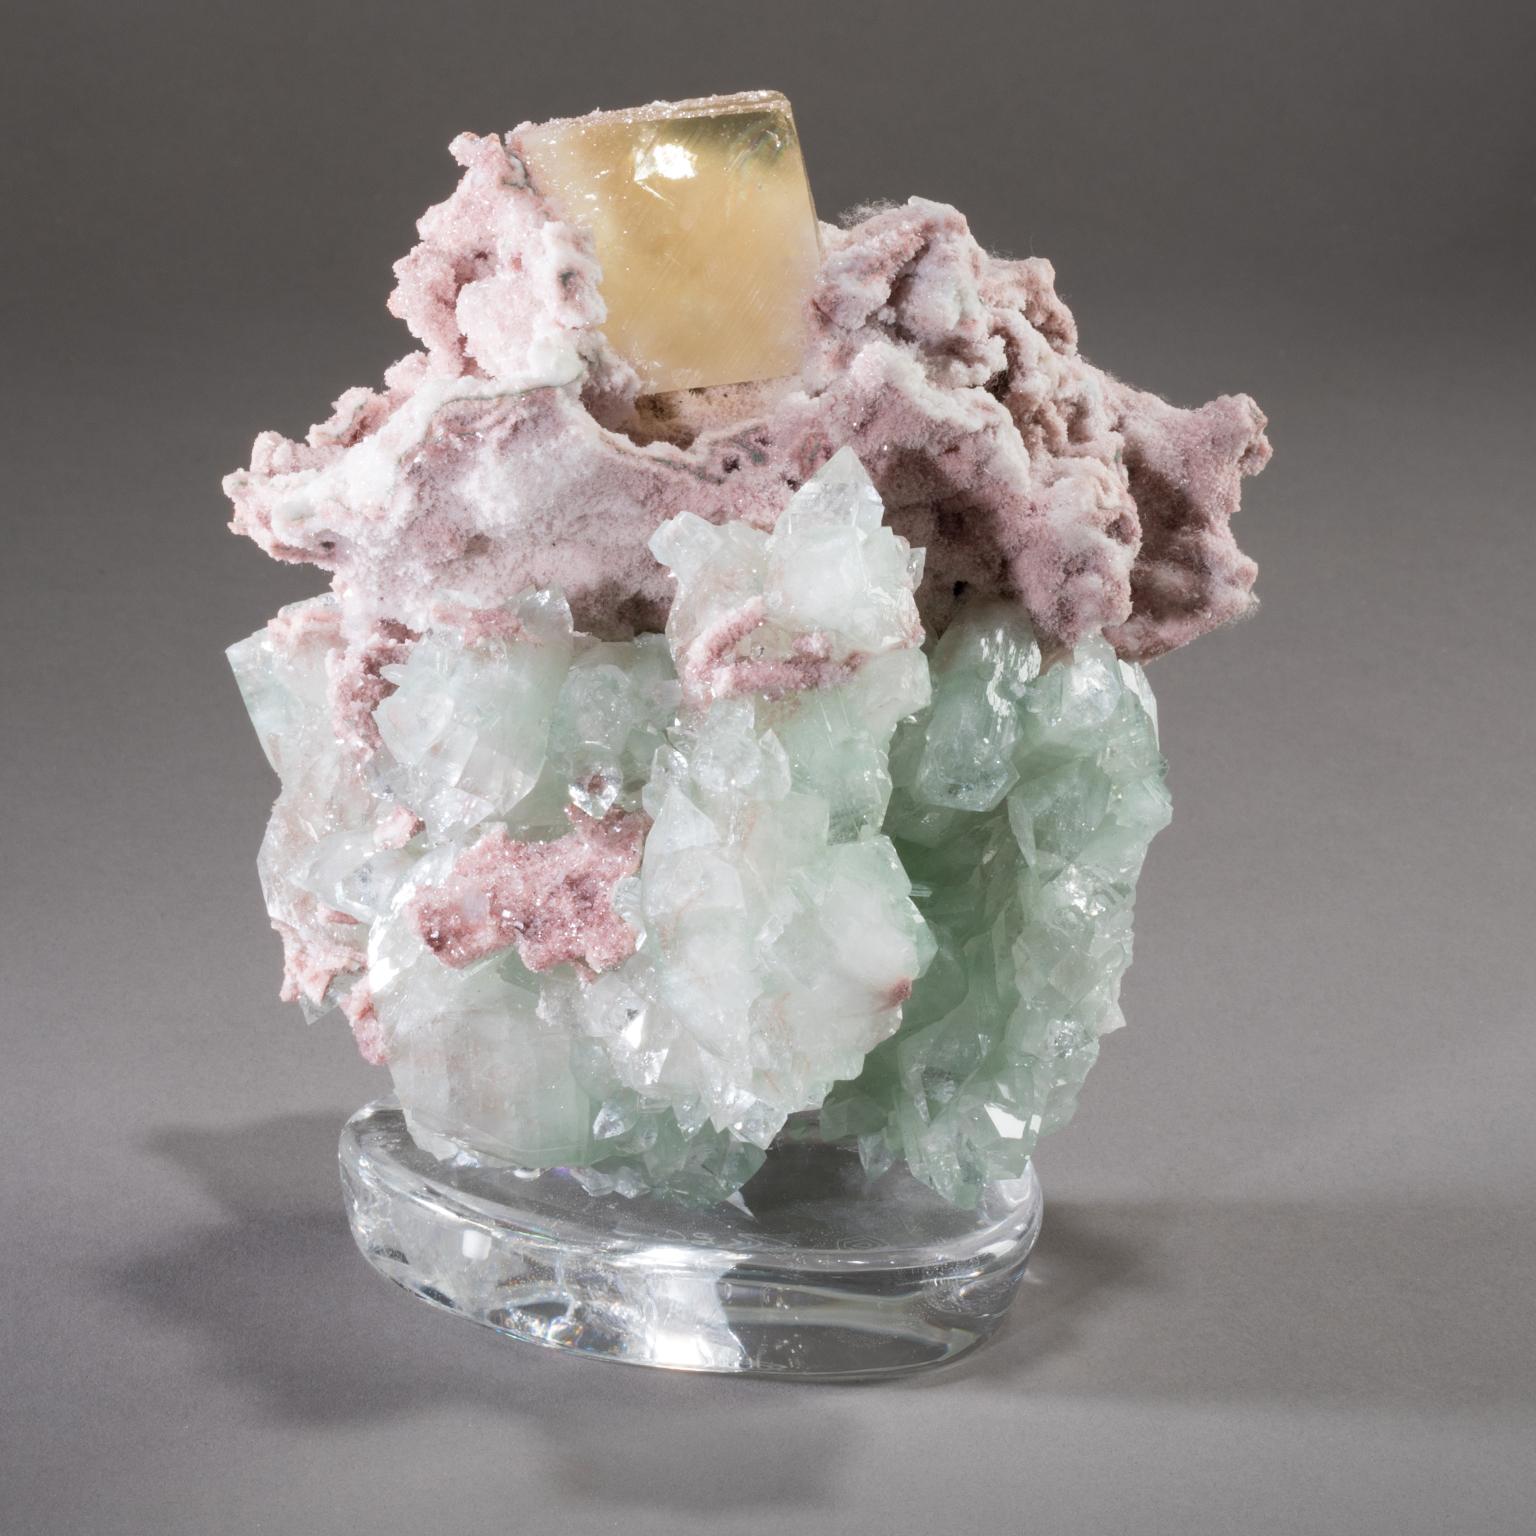 STILBITE, CALCITE, AND APOPHYLLITE ON CRYSTAL BASE

Studio Greytak’s Stilbite, Calcite, and Apophyllite on Crystal Base is a trio of Norse matronae, mythical goddesses sent to provide comfort, protection, and peace. A soft bed of blue apophyllite